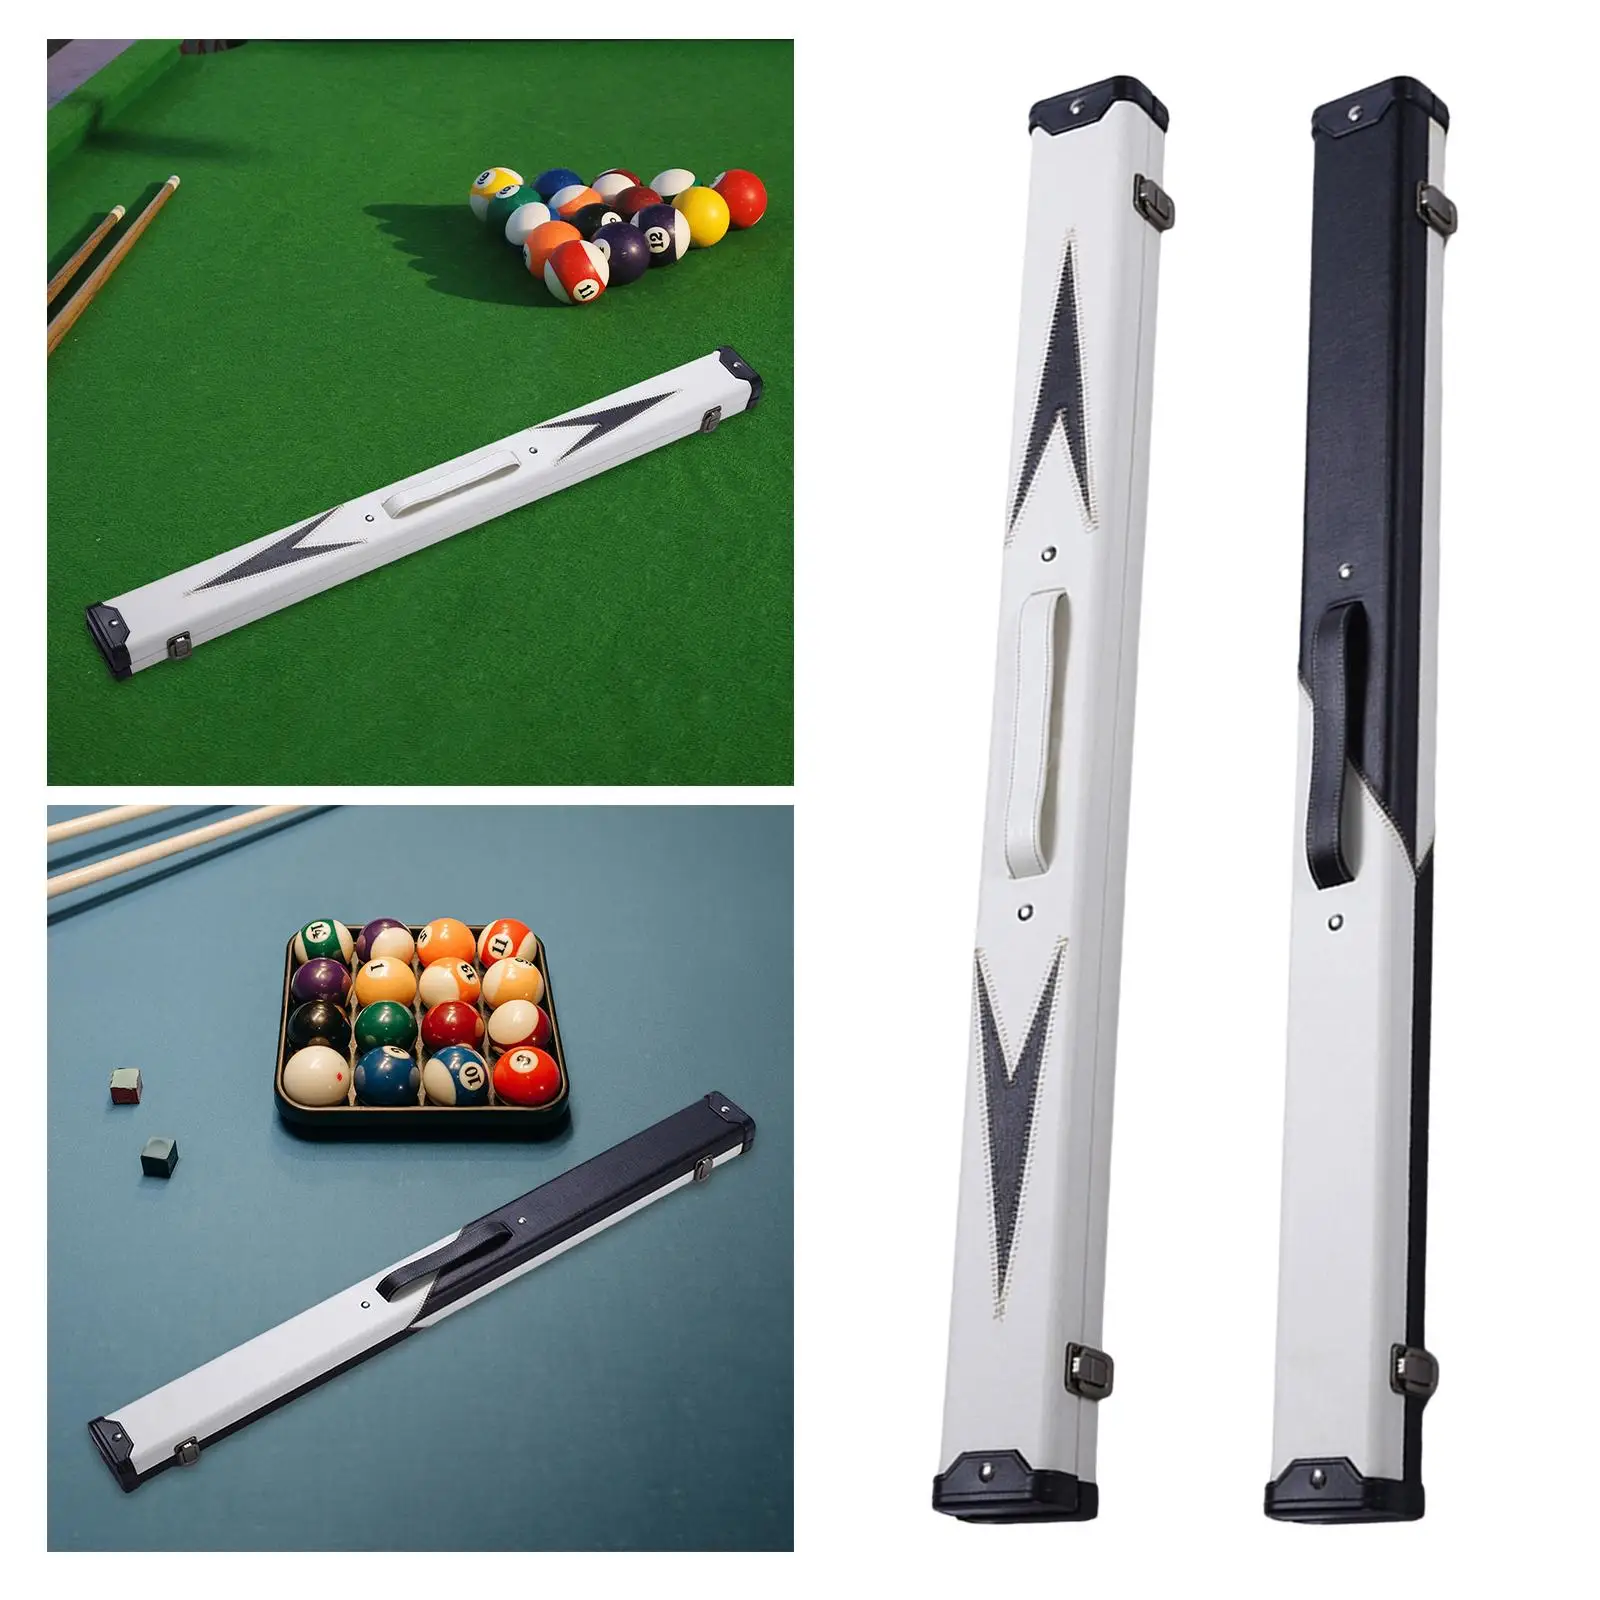 Billiards Pool Hard Case Carrying Organizing Holds Shaft for 1/2 Snooker